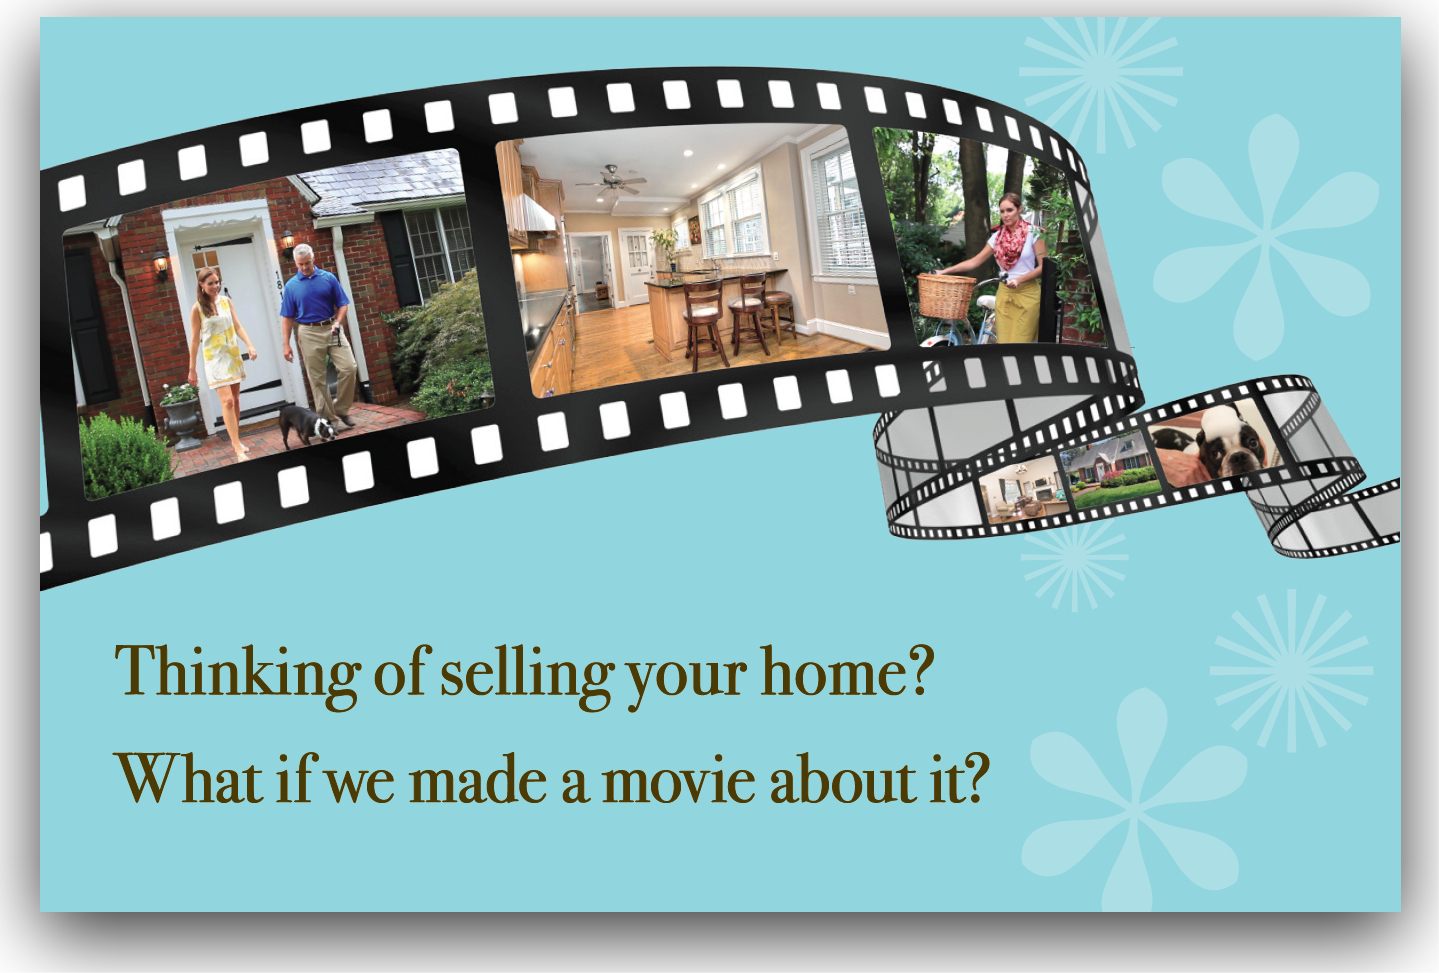 Home story Lifestyle Video Marketing Charlotte Home for sale